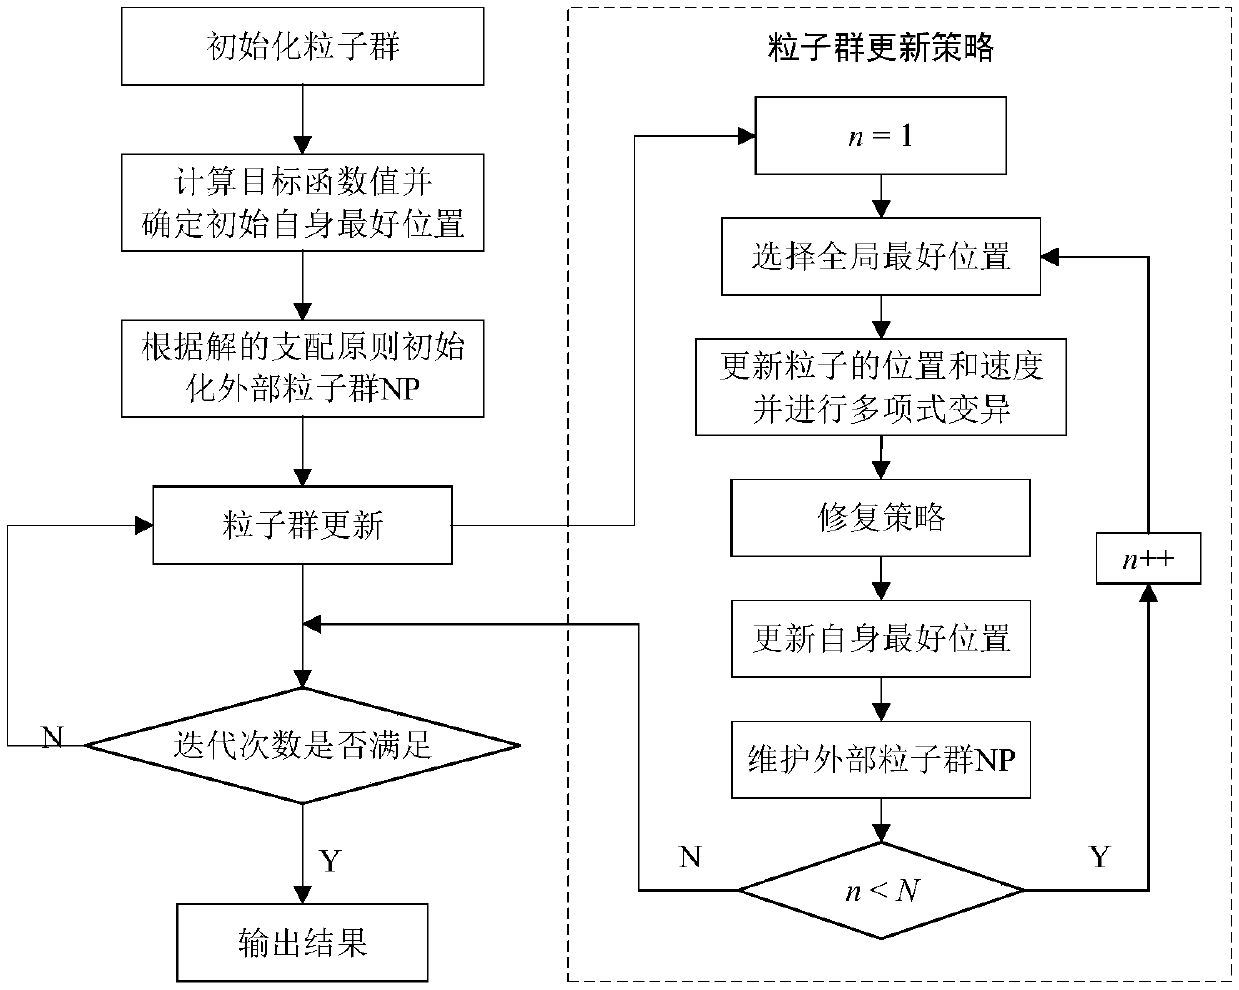 Hydropower station short-term multi-target power generation plan compilation method and system for peak load regulation of a power grid